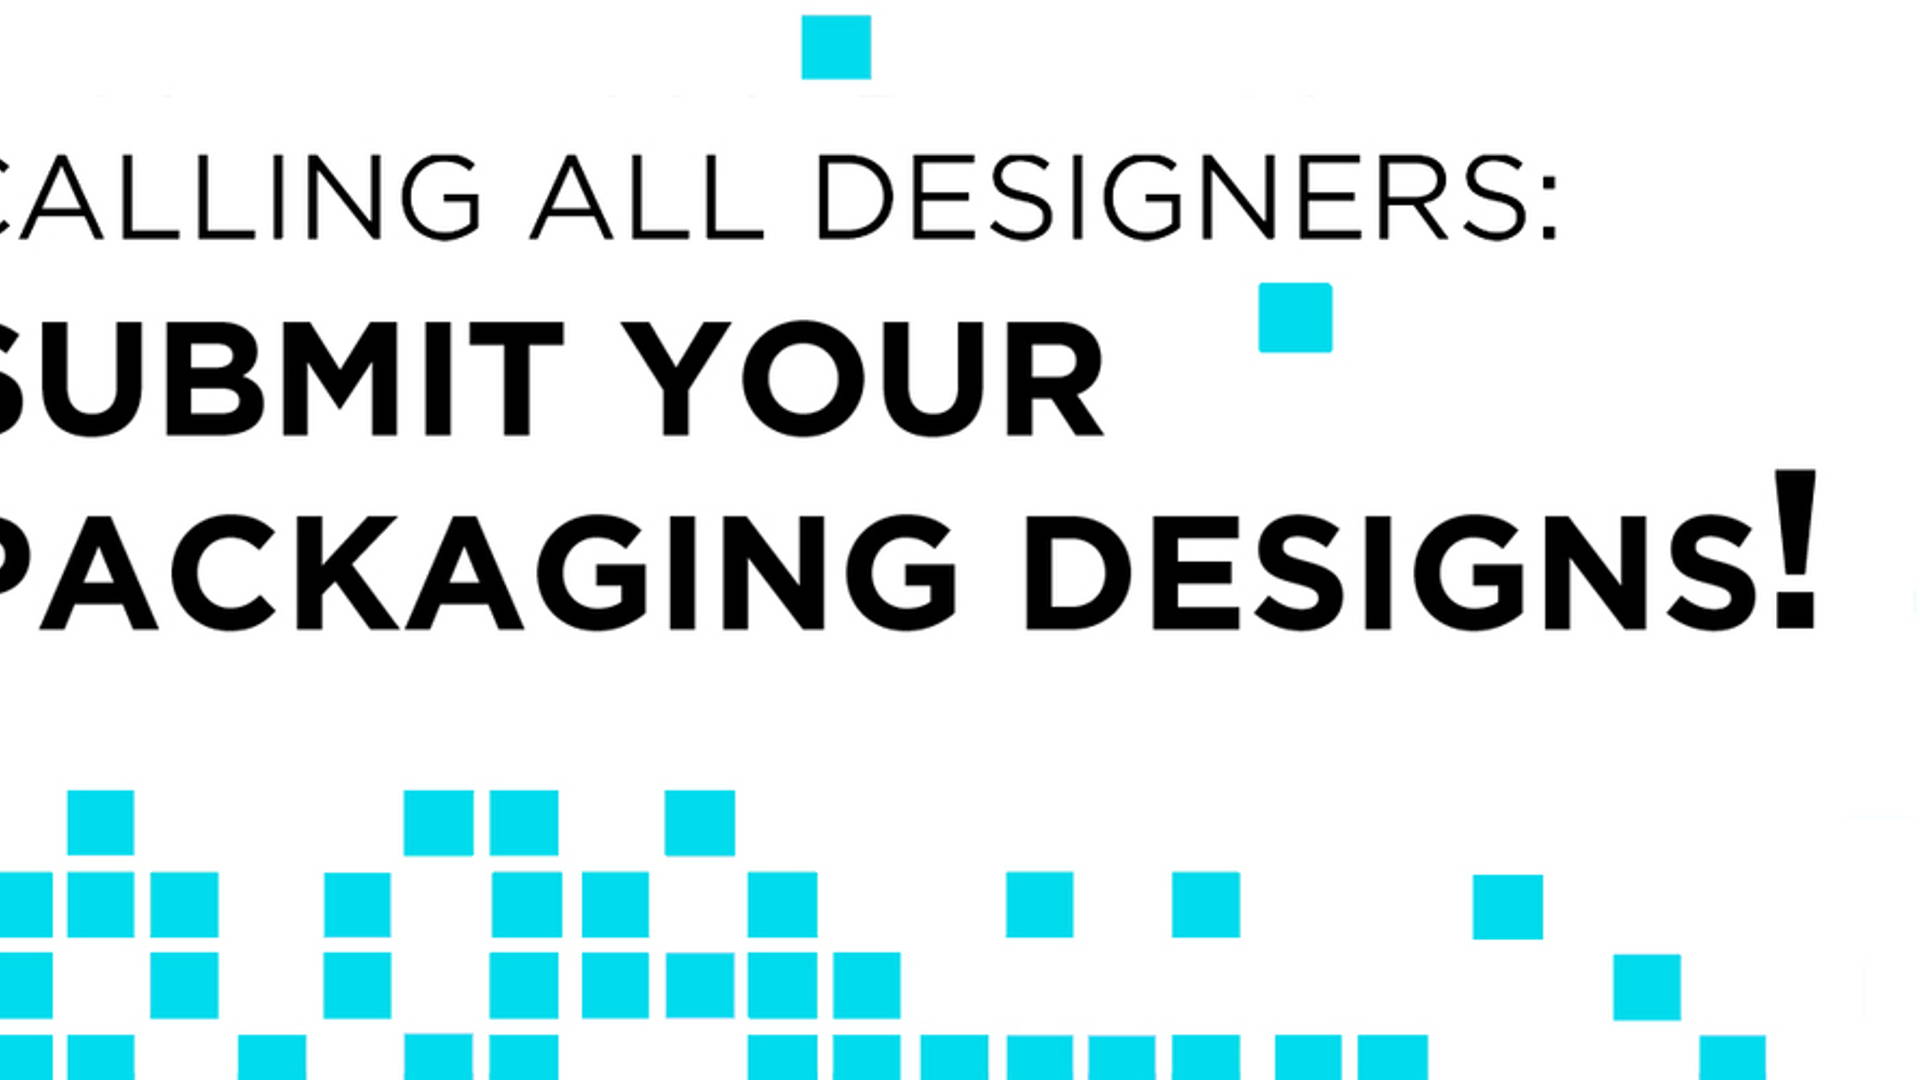 Featured image for Calling all Designers: Submit Your Packaging Designs!